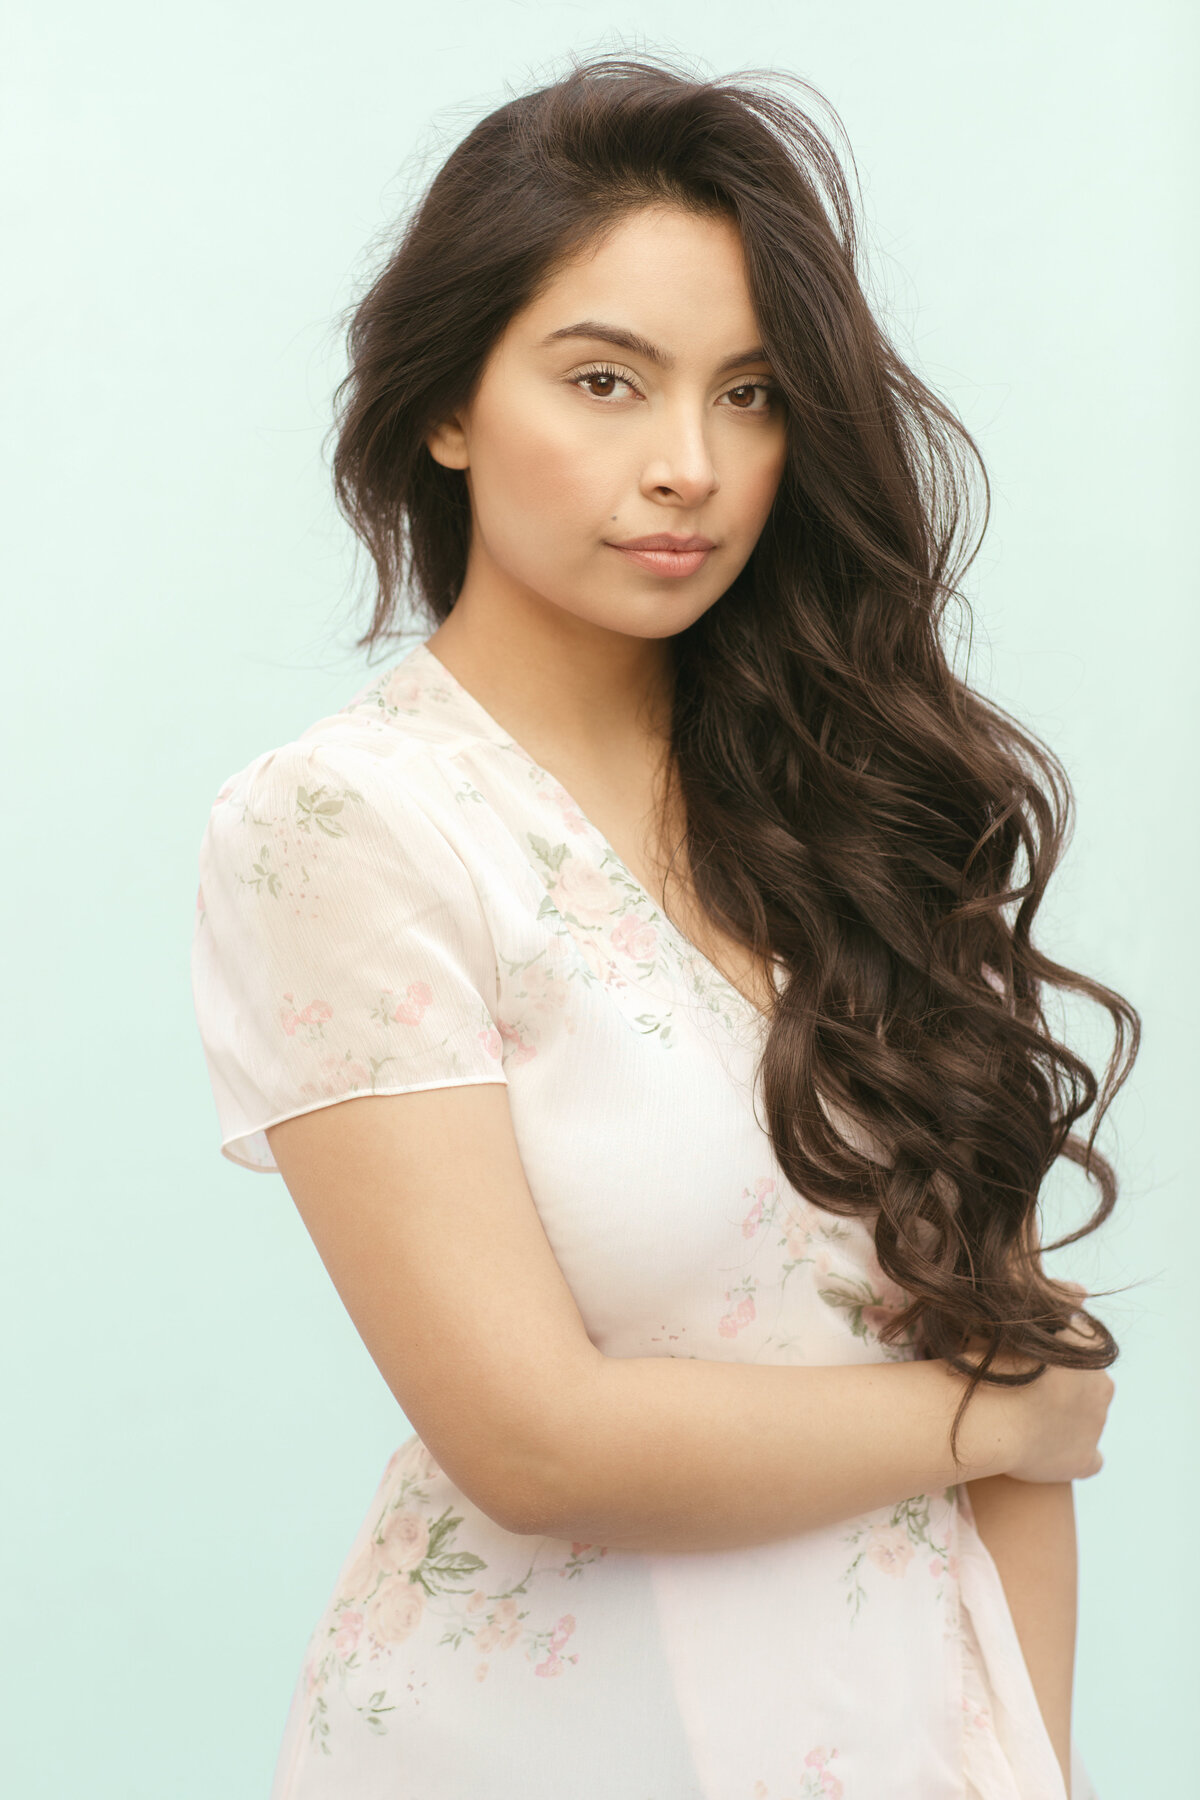 Portrait Photo Of Young Woman In Floral Dress Los Angeles